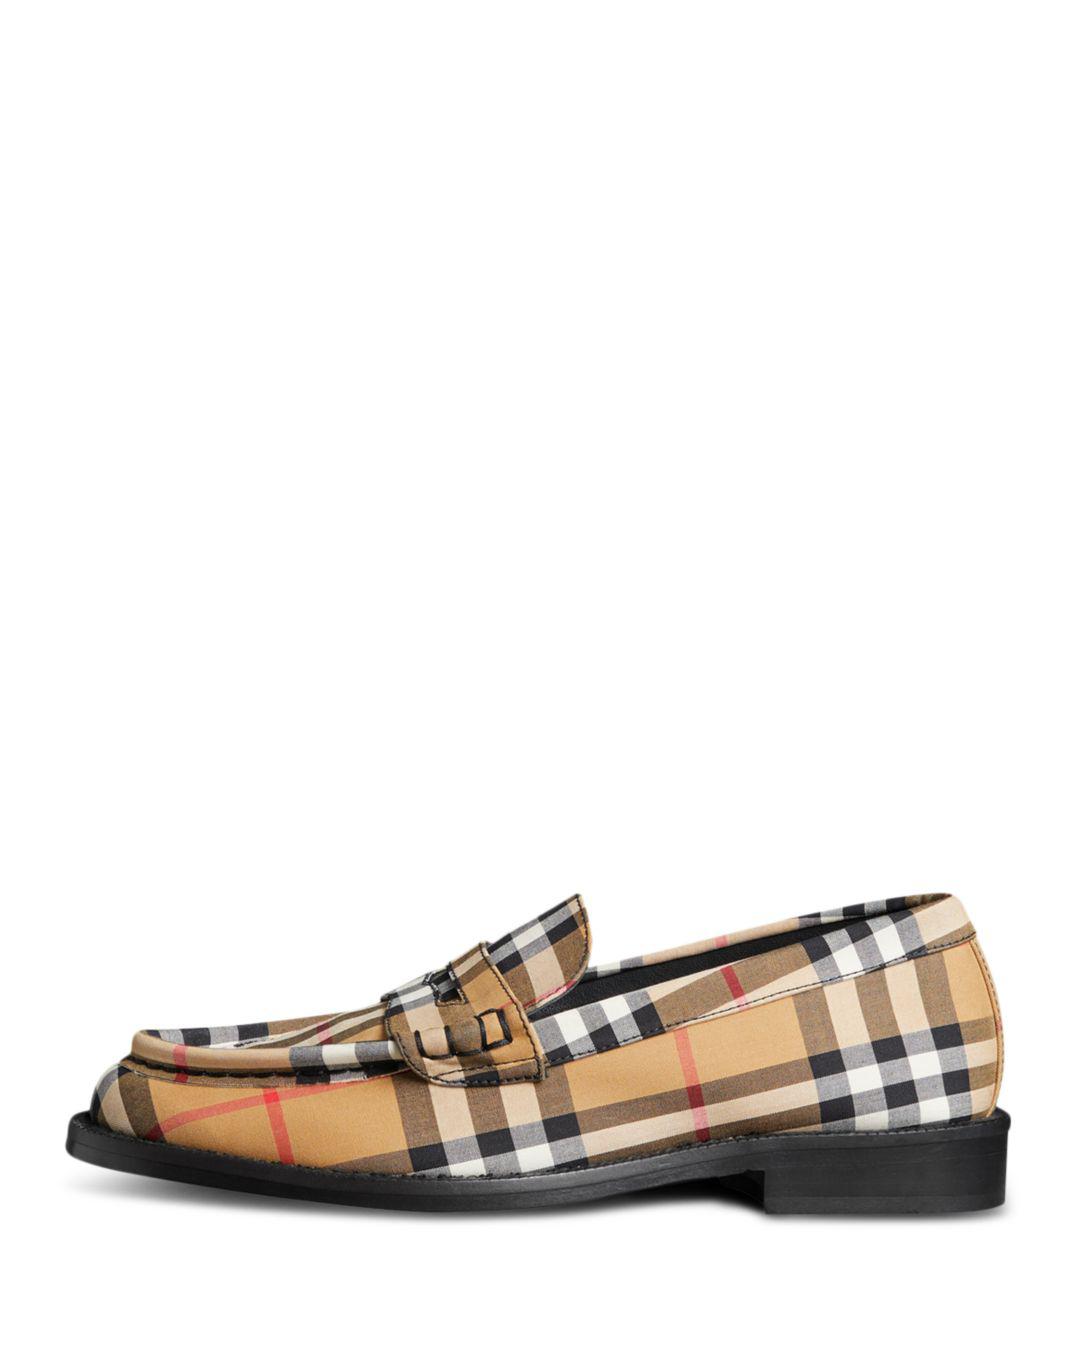 burberry moccasins